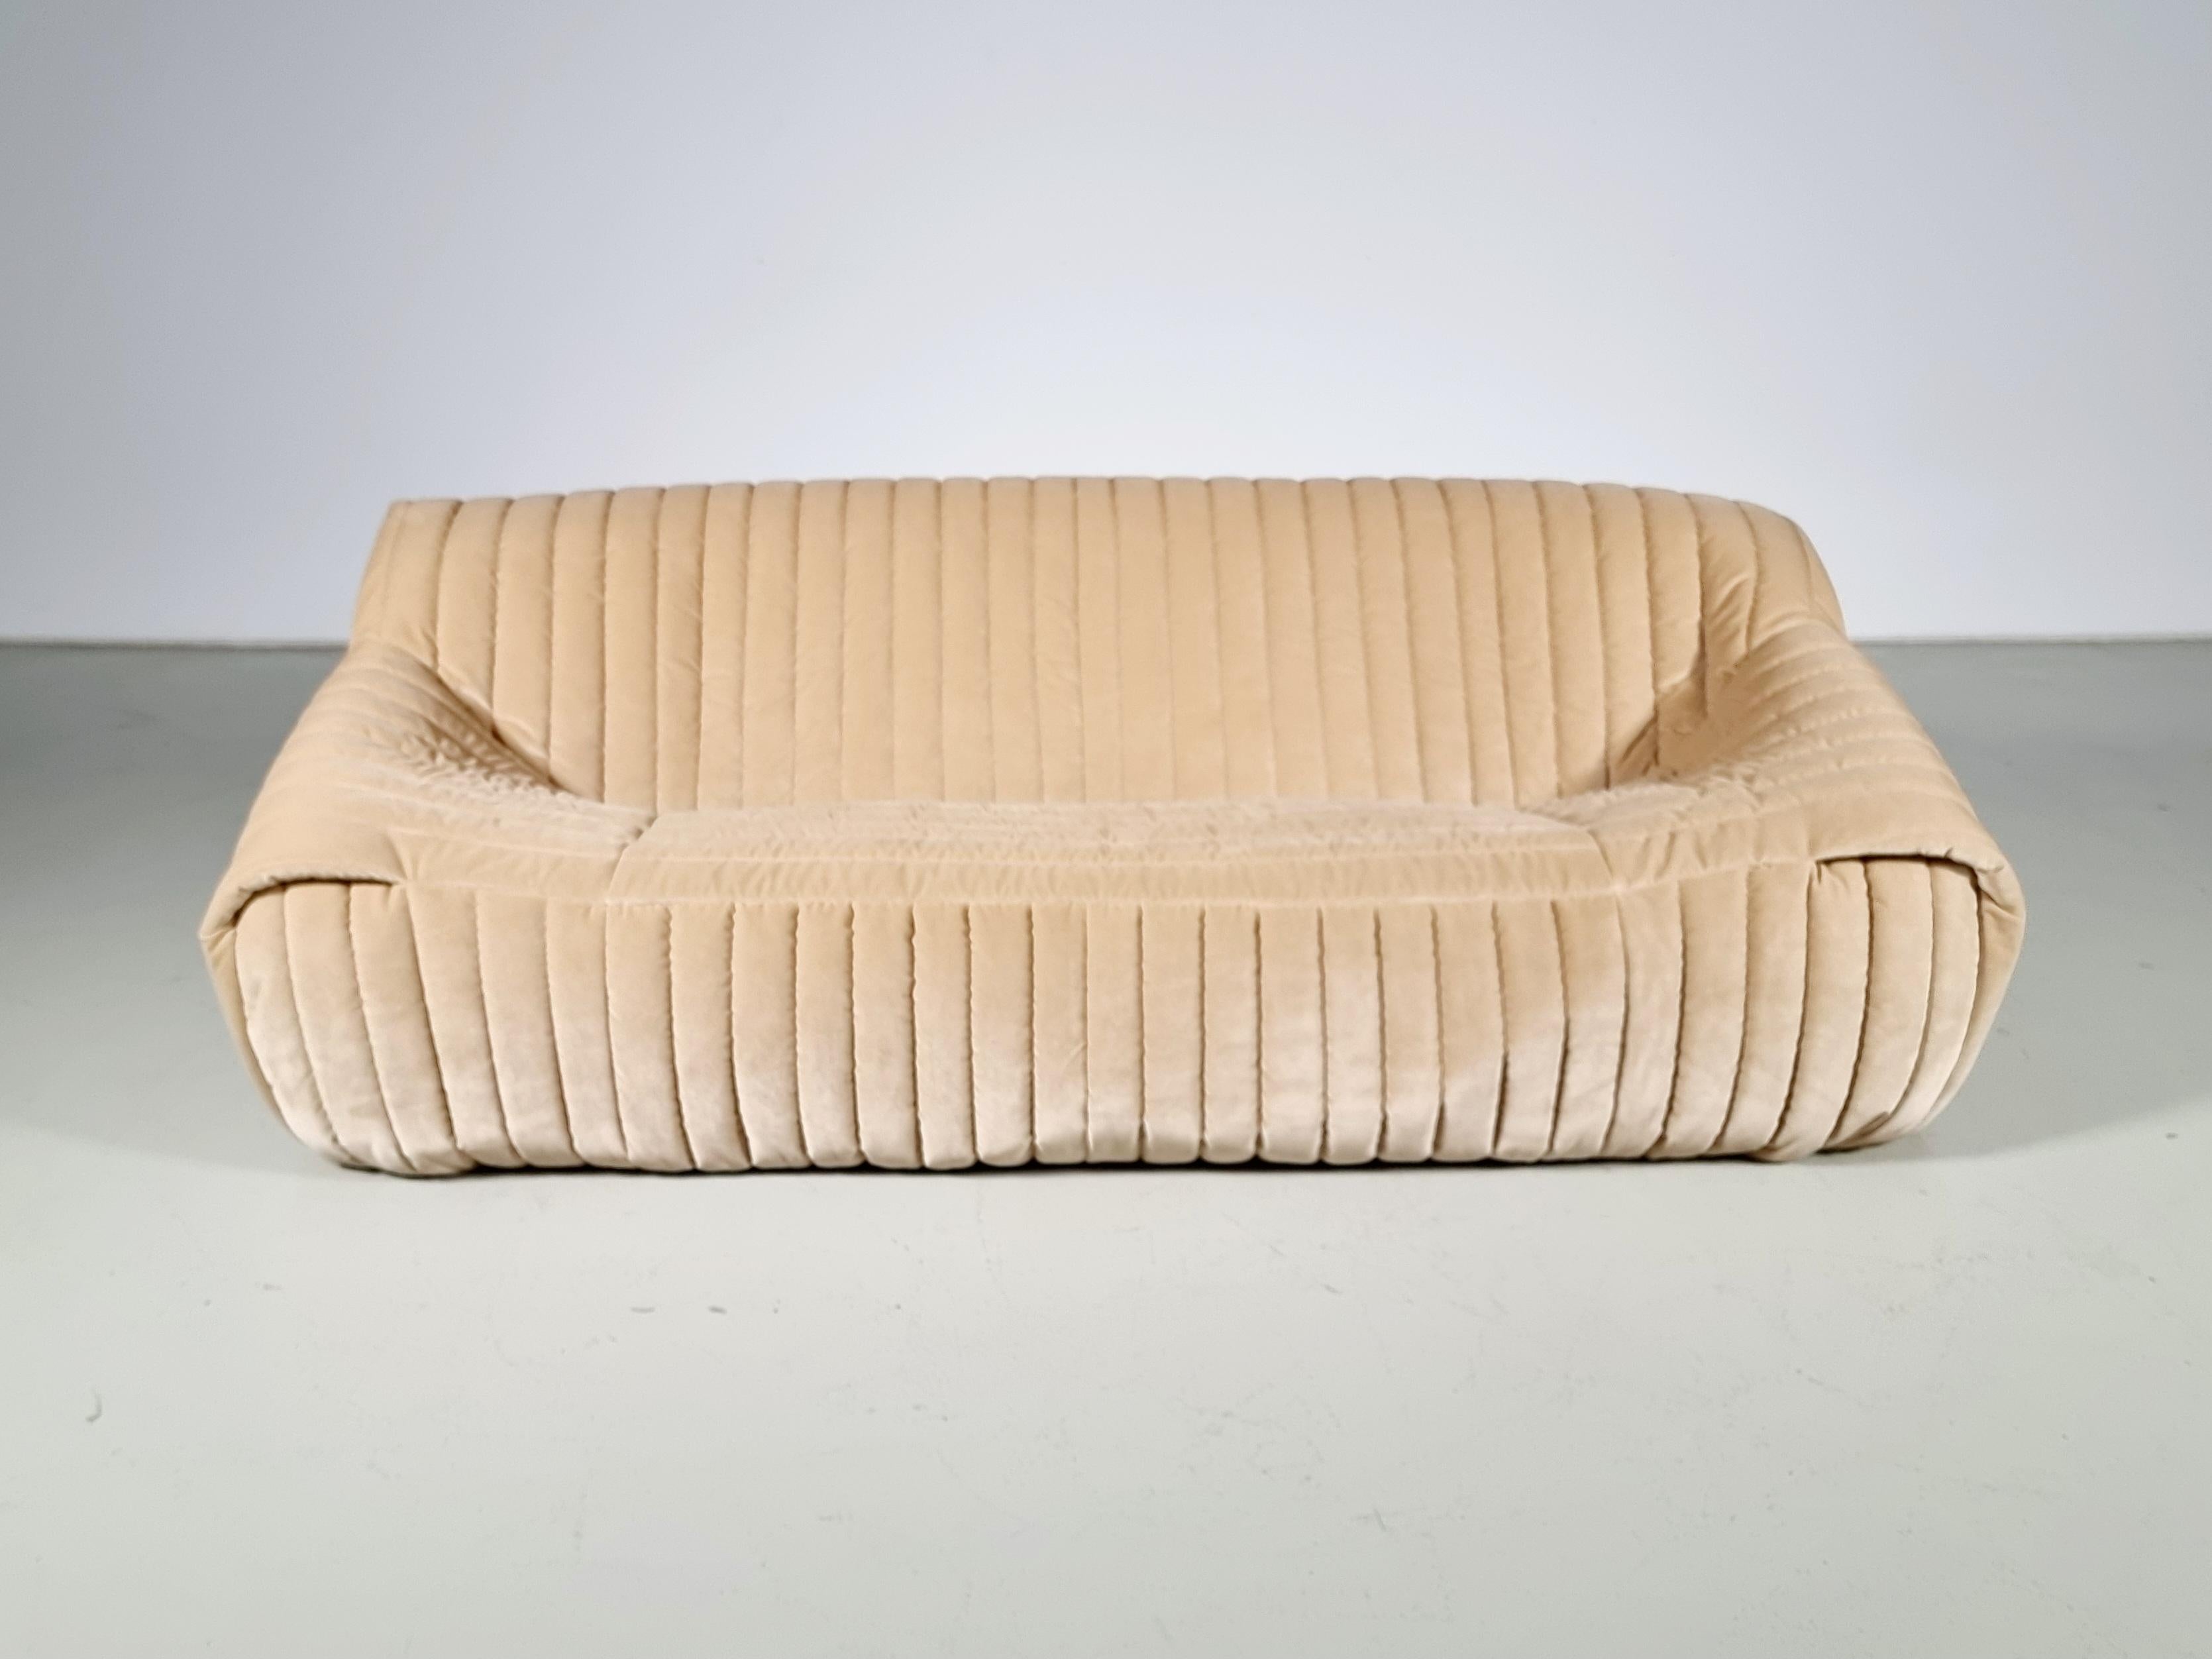 The Sandra sofa was designed by Annie Hiéronimus for Cinna after she joined the Roset Bureau d'Etudes in 1976.

Constructed fully from foam, the sofa has a solid form. The lines enhance the soft curves of the sofa and the folds of the fabric, giving